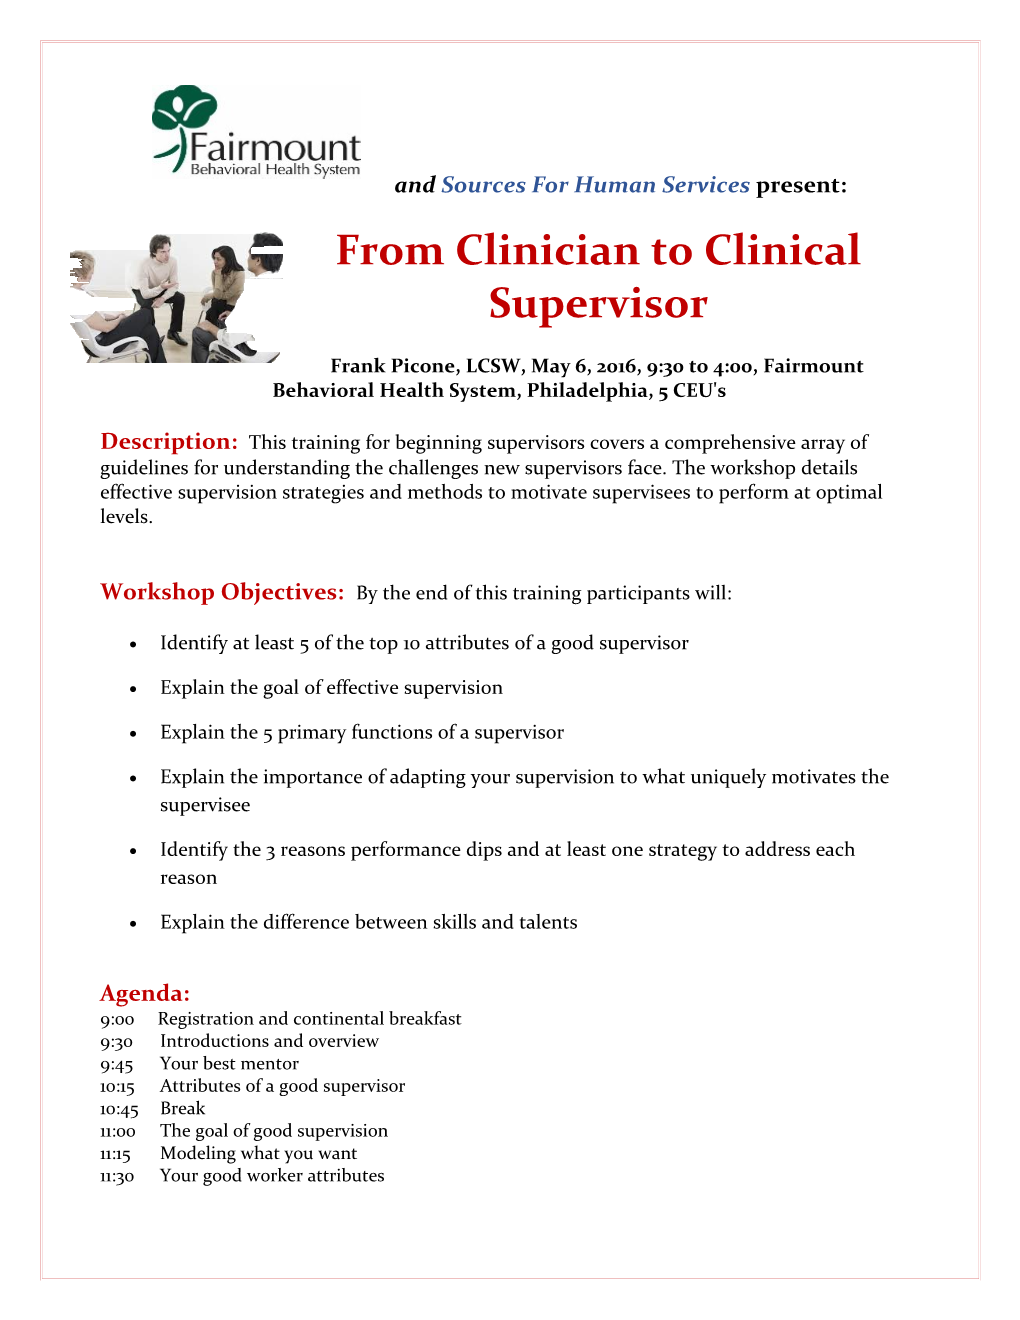 From Clinician to Clinical Supervisor